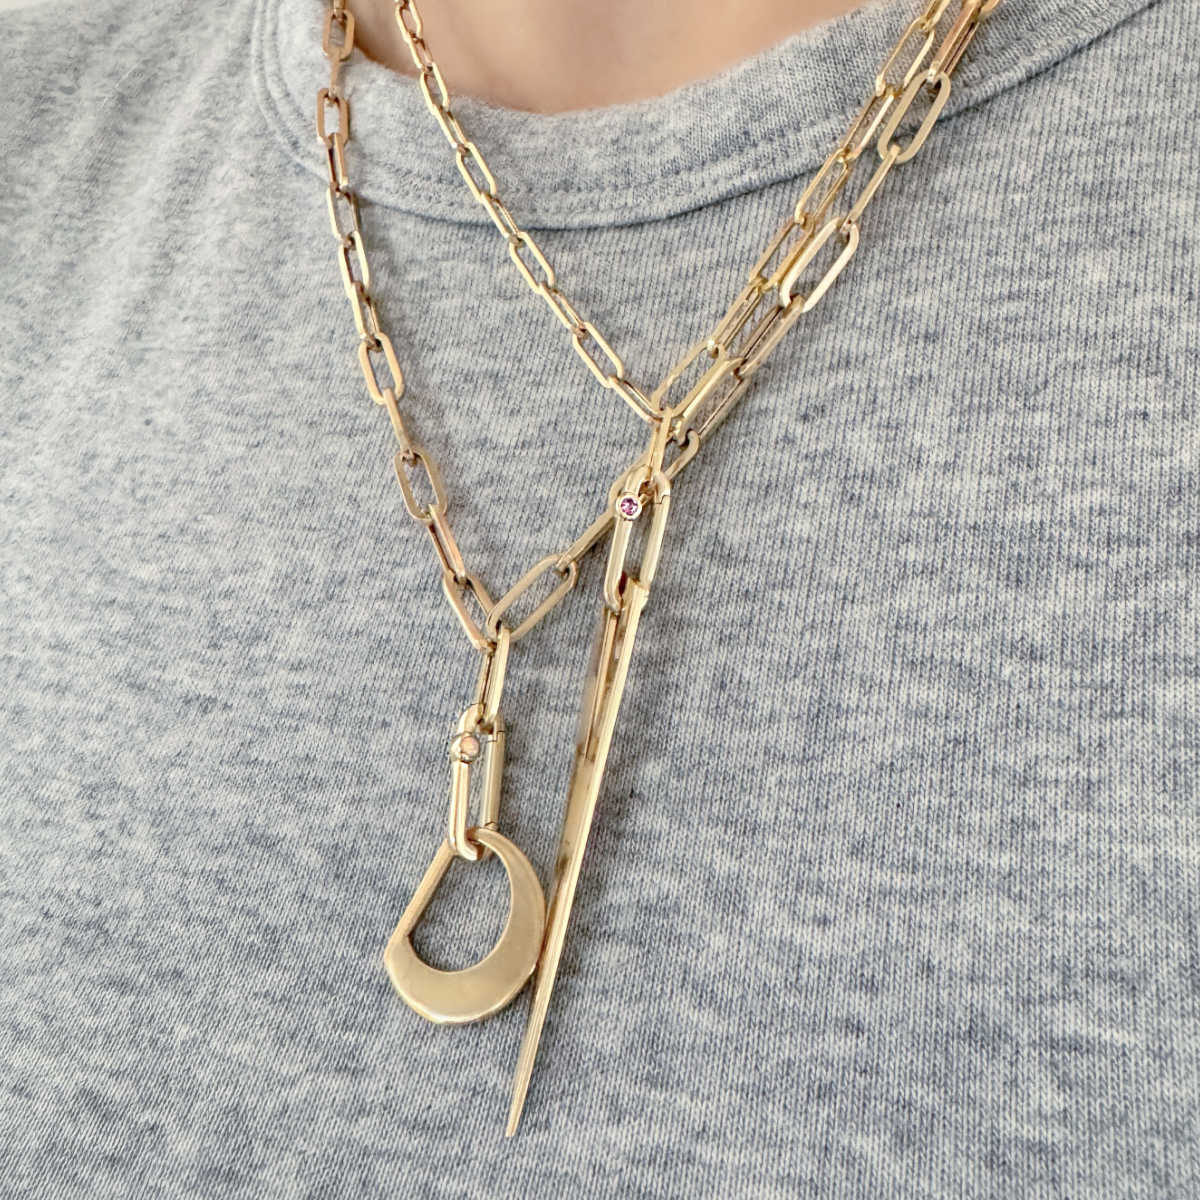 Large Gold Pendant, Solid 14k Geometric Spike Necklace on Model